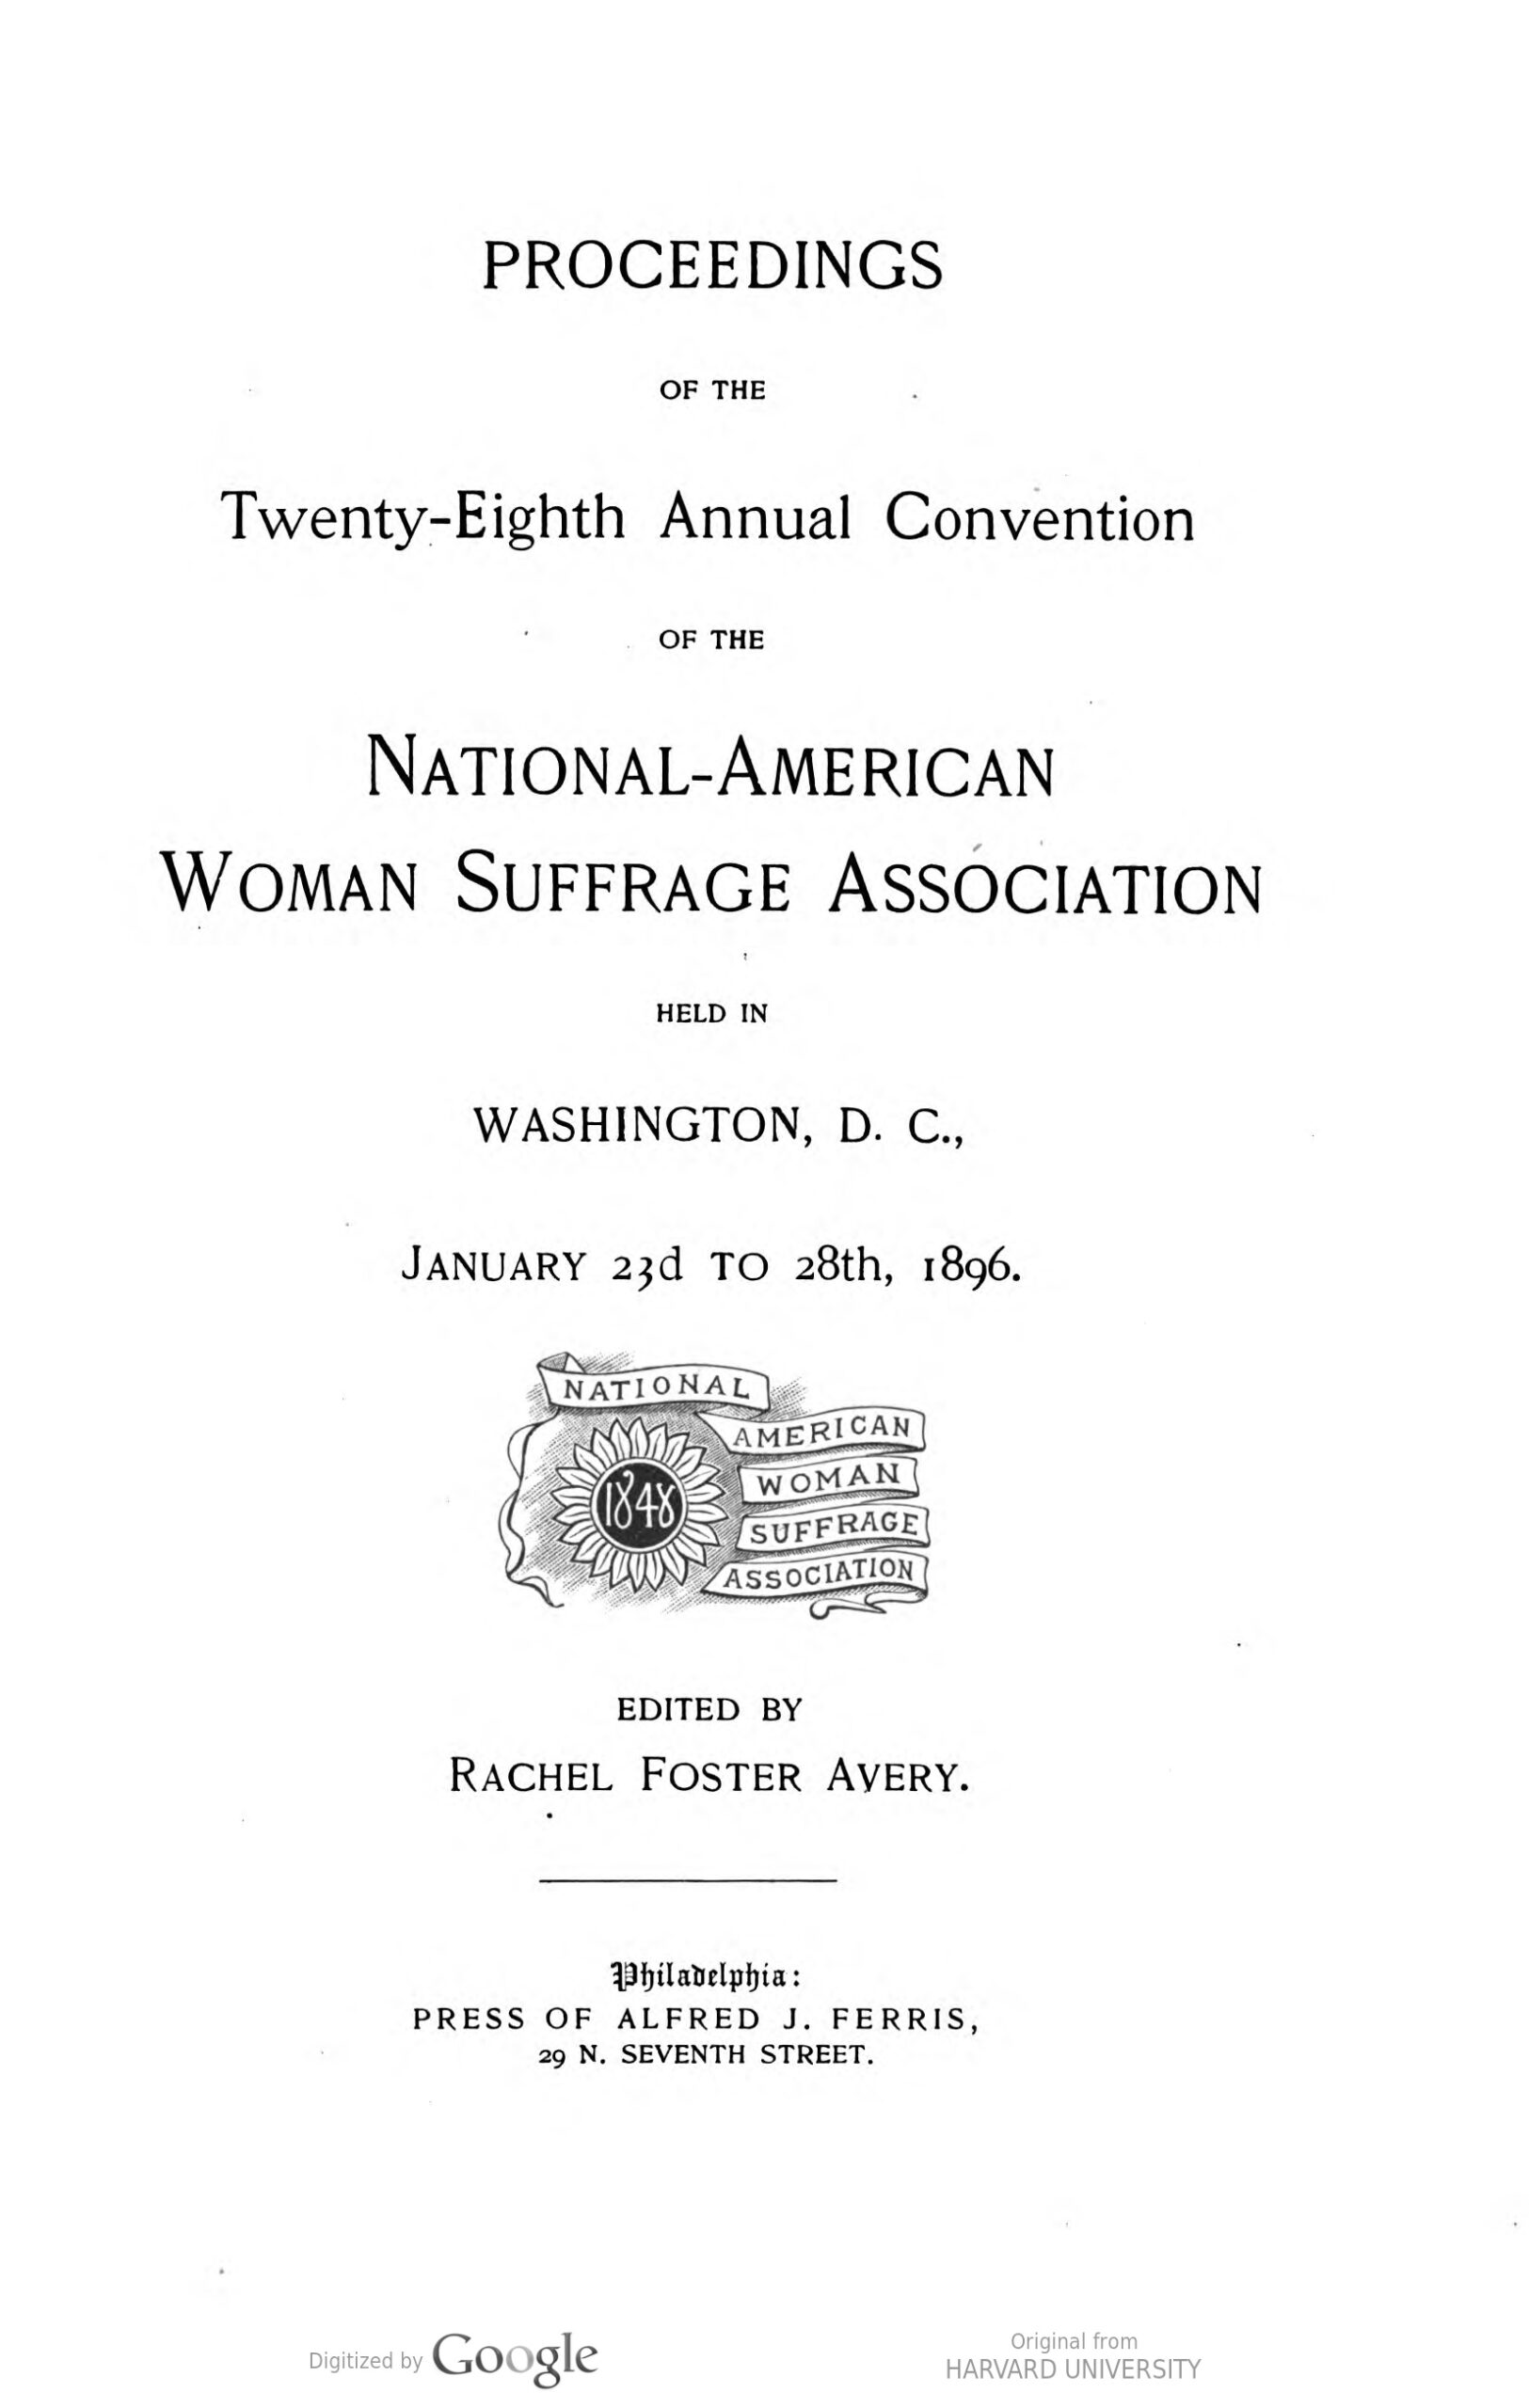 Printed title page for the 28th Annual Convention of the National-American Woman Suffrage Association, including a logo in the form of a sunflower.